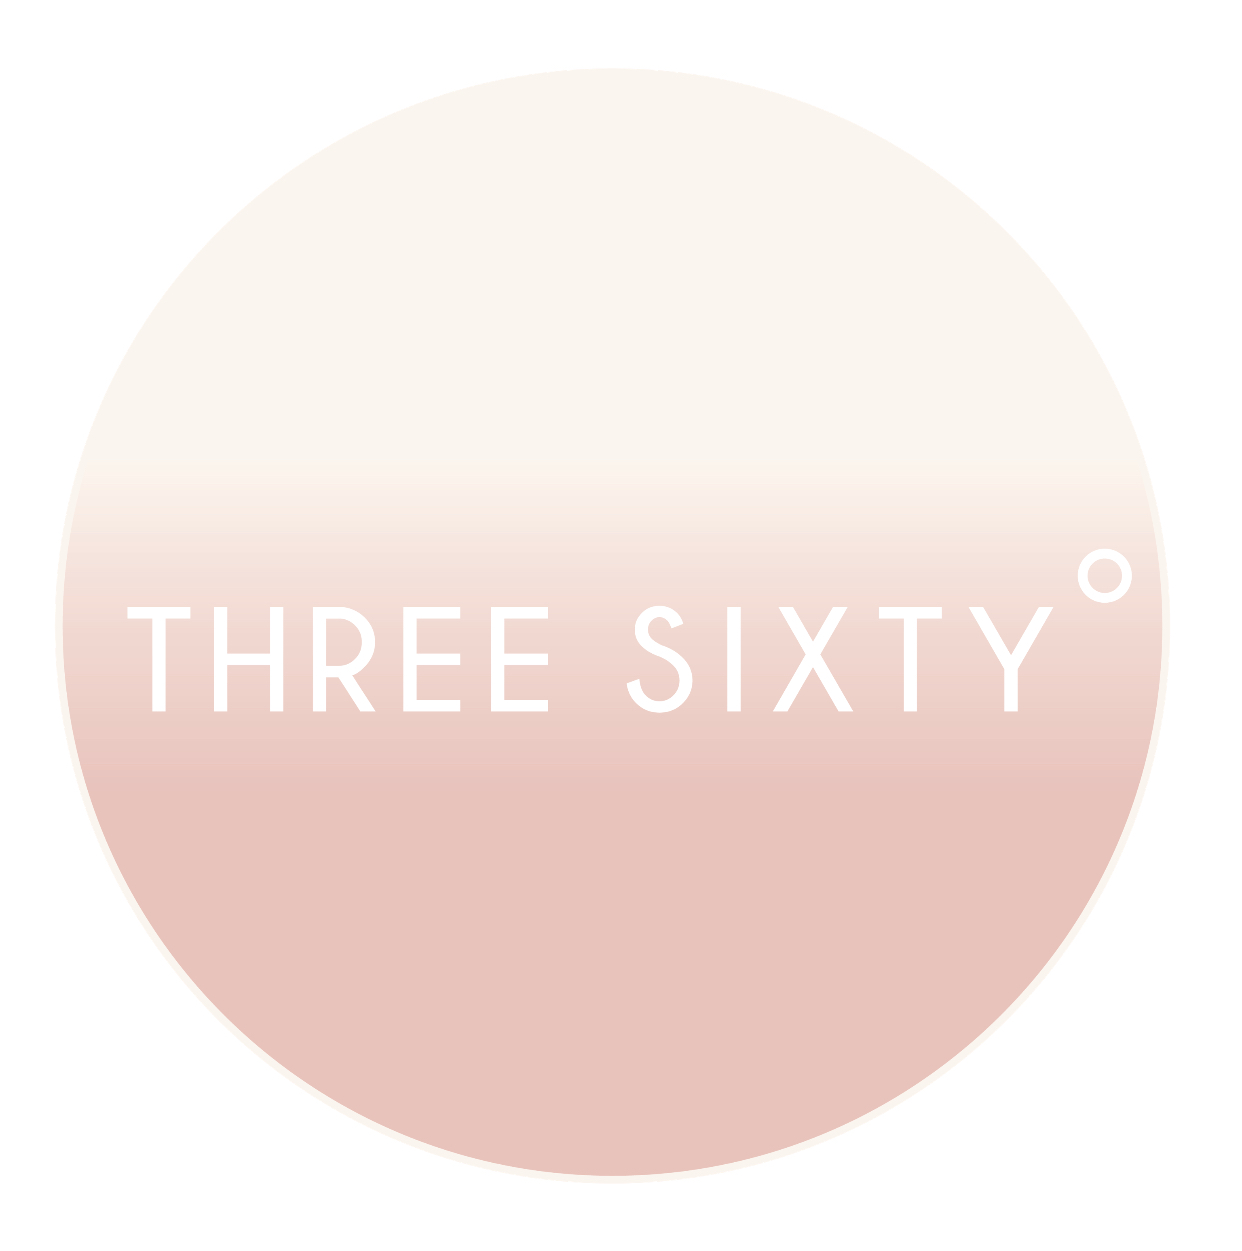 An introduction to the Three Sixty Conversations podcast 